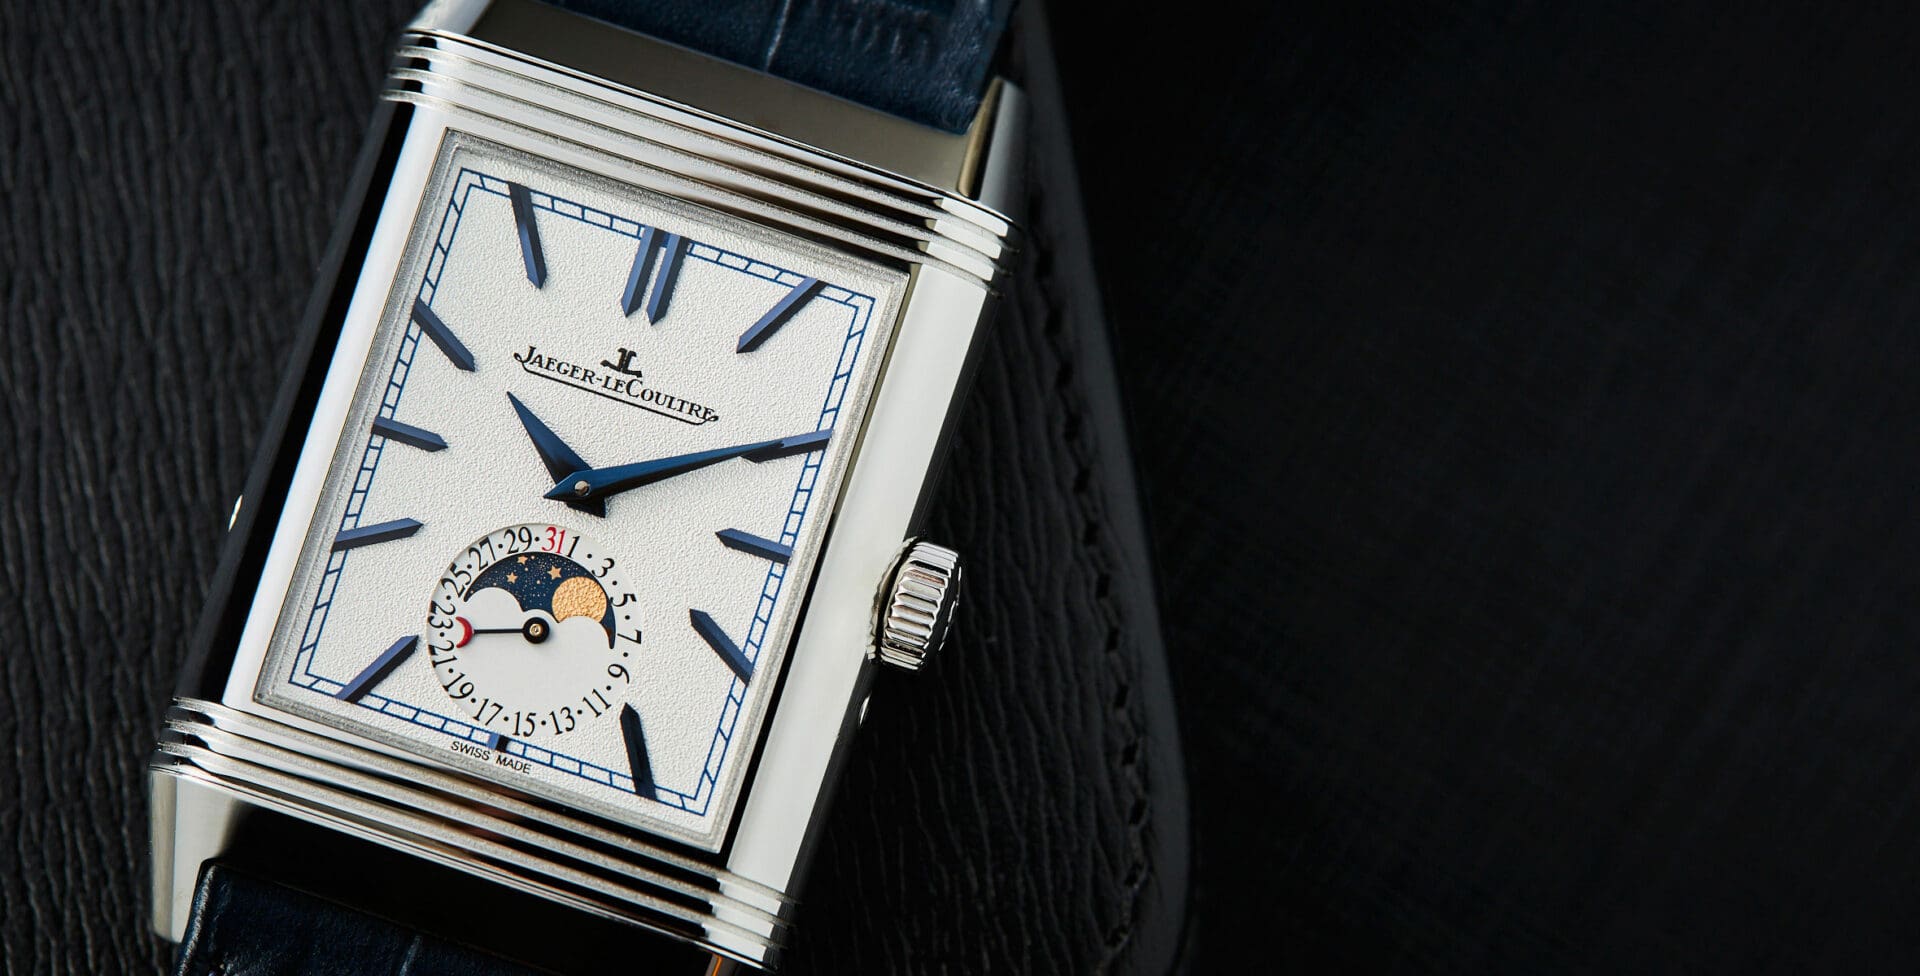 HANDS-ON: Janus-faced – the Jaeger-LeCoultre Reverso Tribute Moon